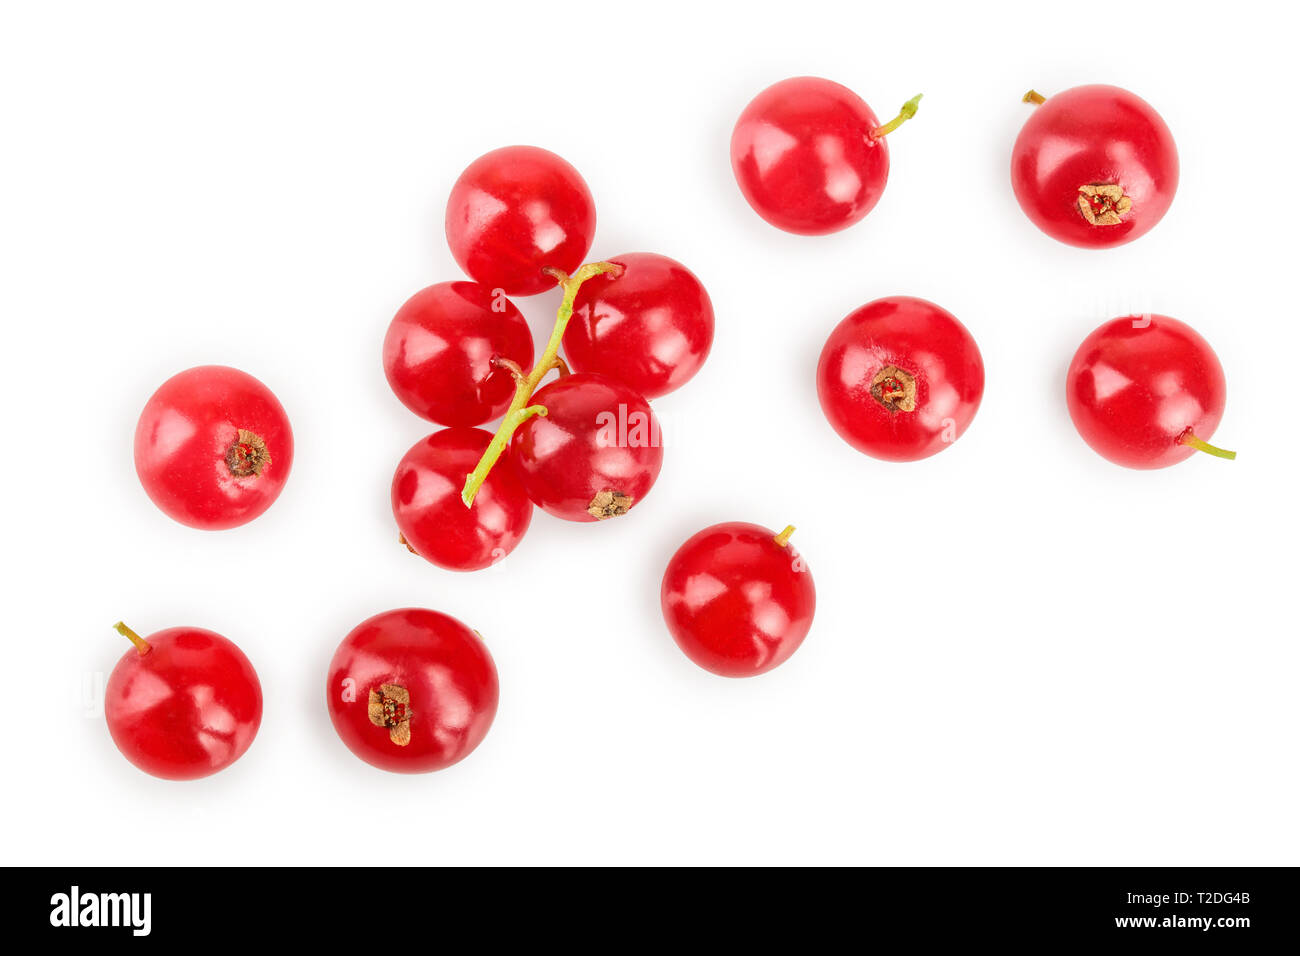 Red currant berry isolated on white background. Top view. Flat lay pattern. Stock Photo